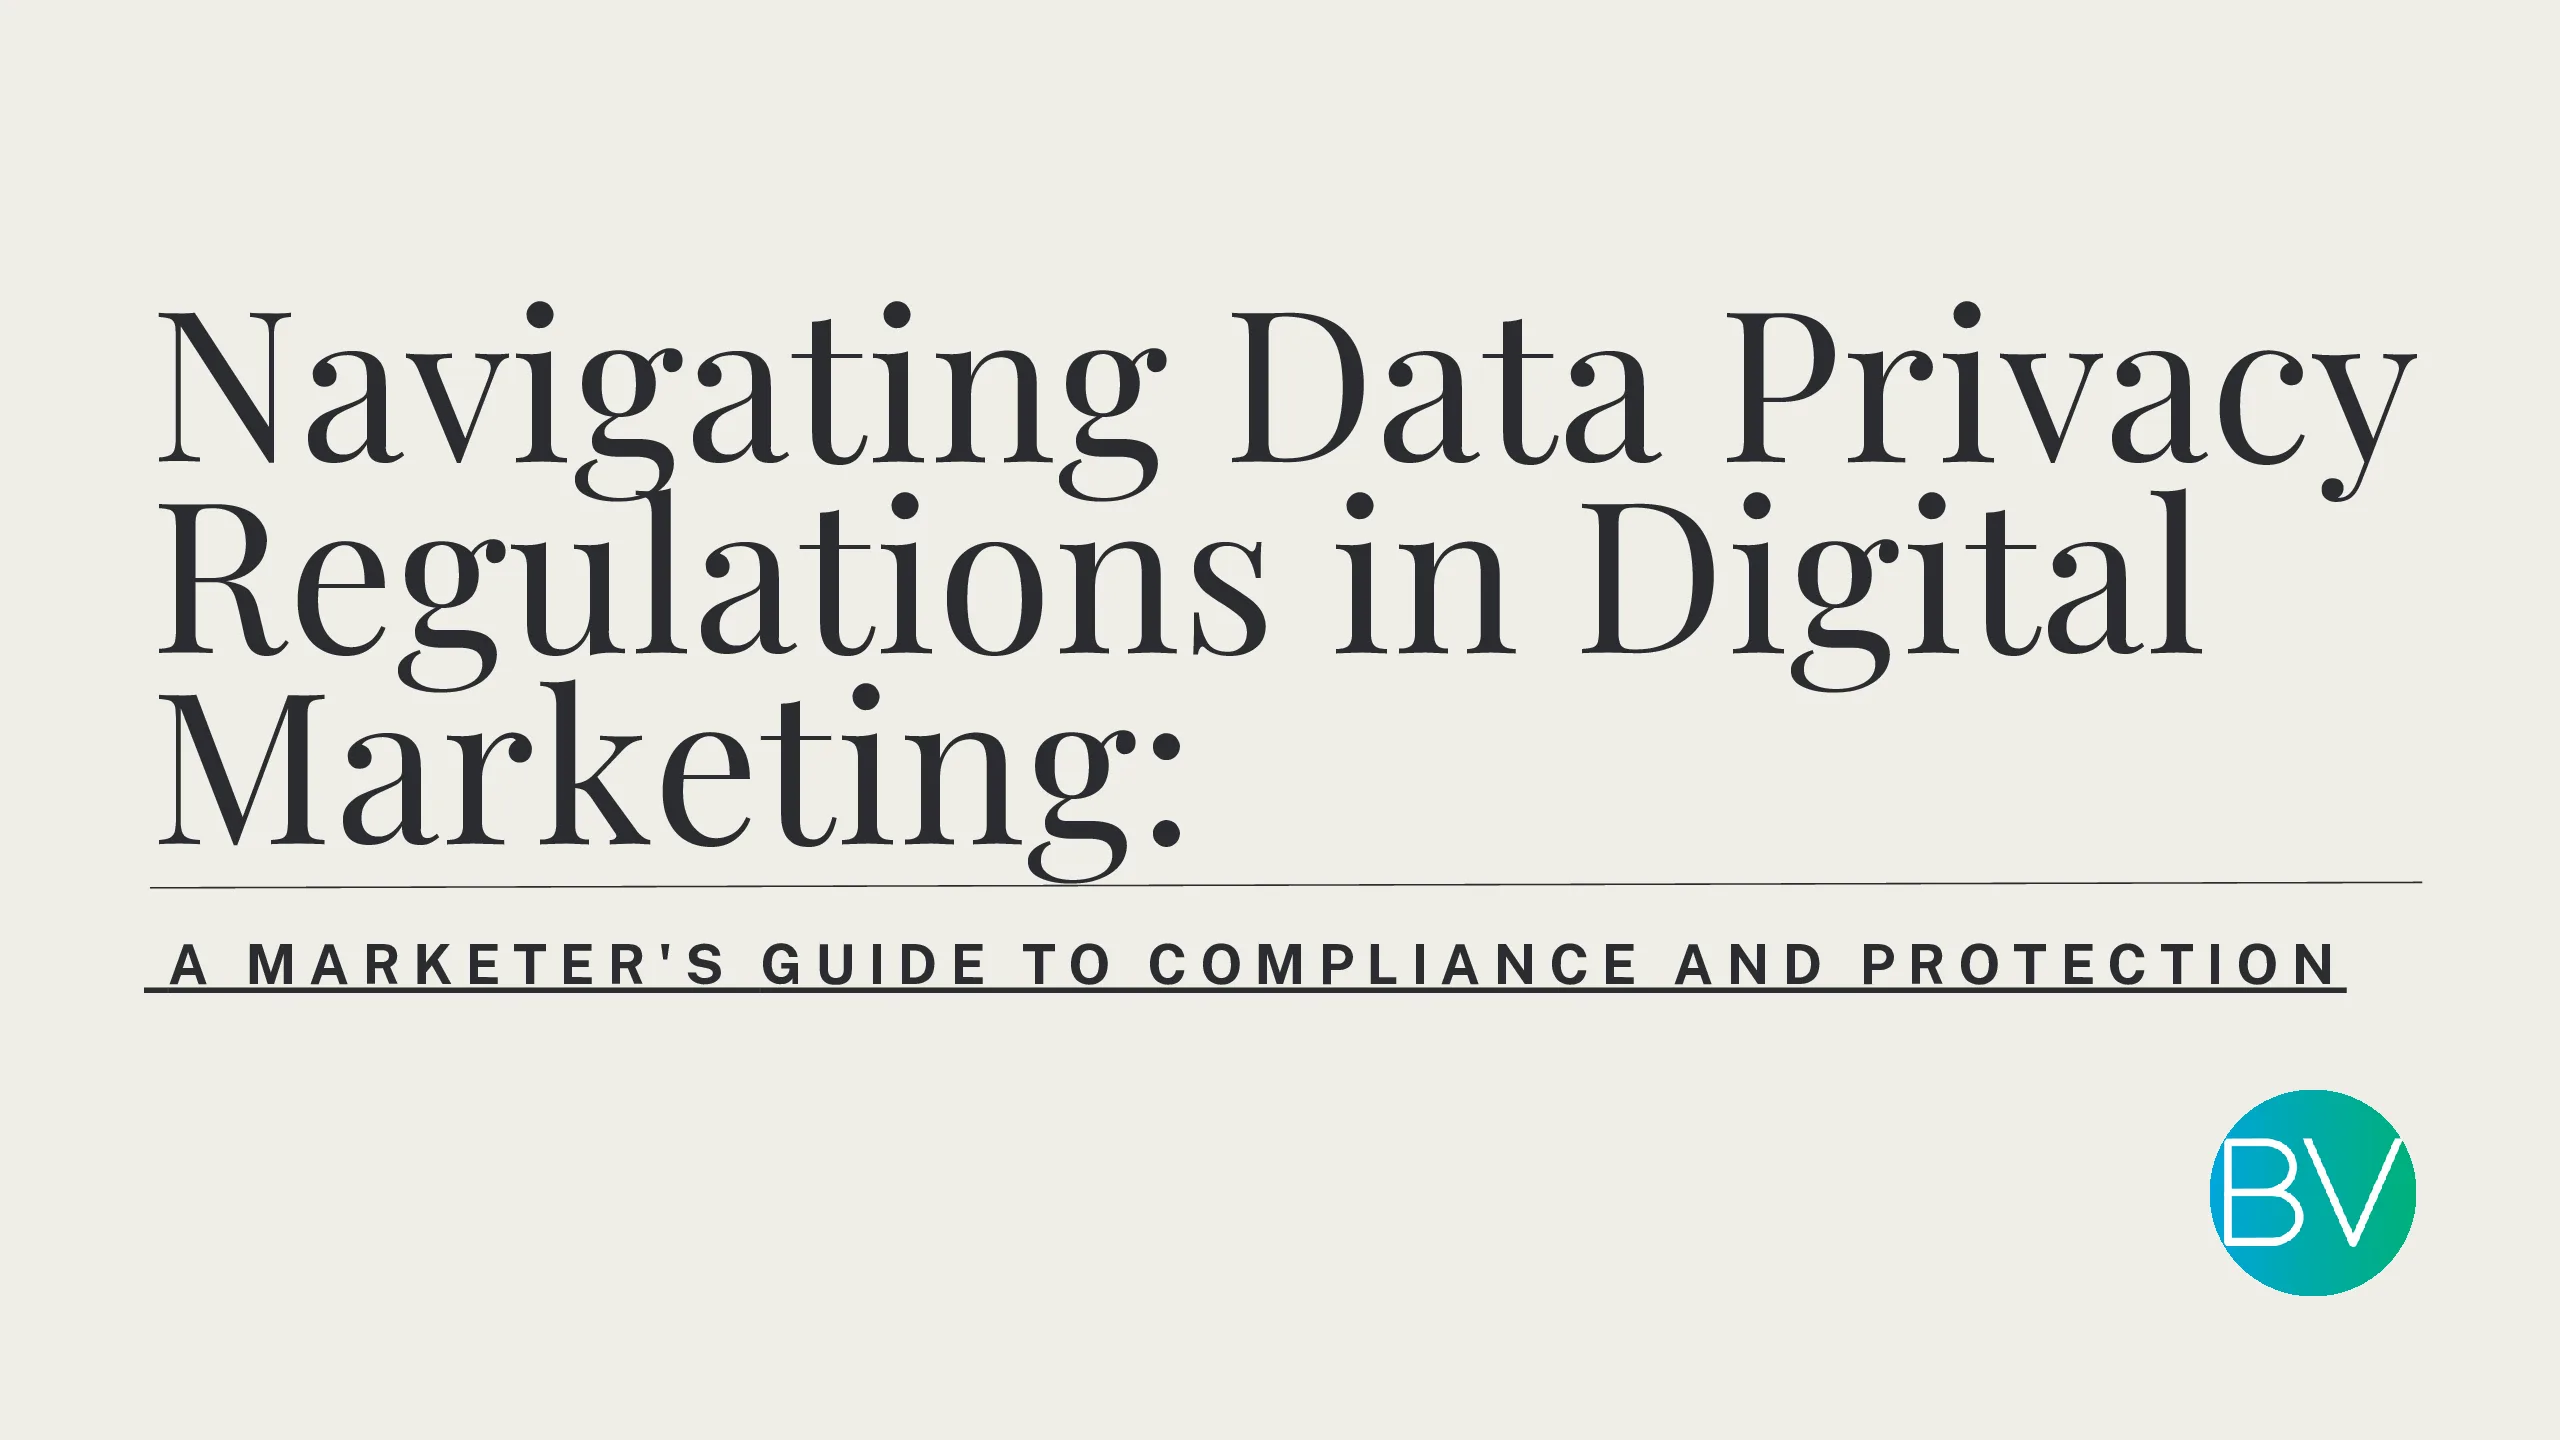 Navigating Data Privacy Regulations in Digital Marketing: A Marketer’s Guide to Compliance and Protection